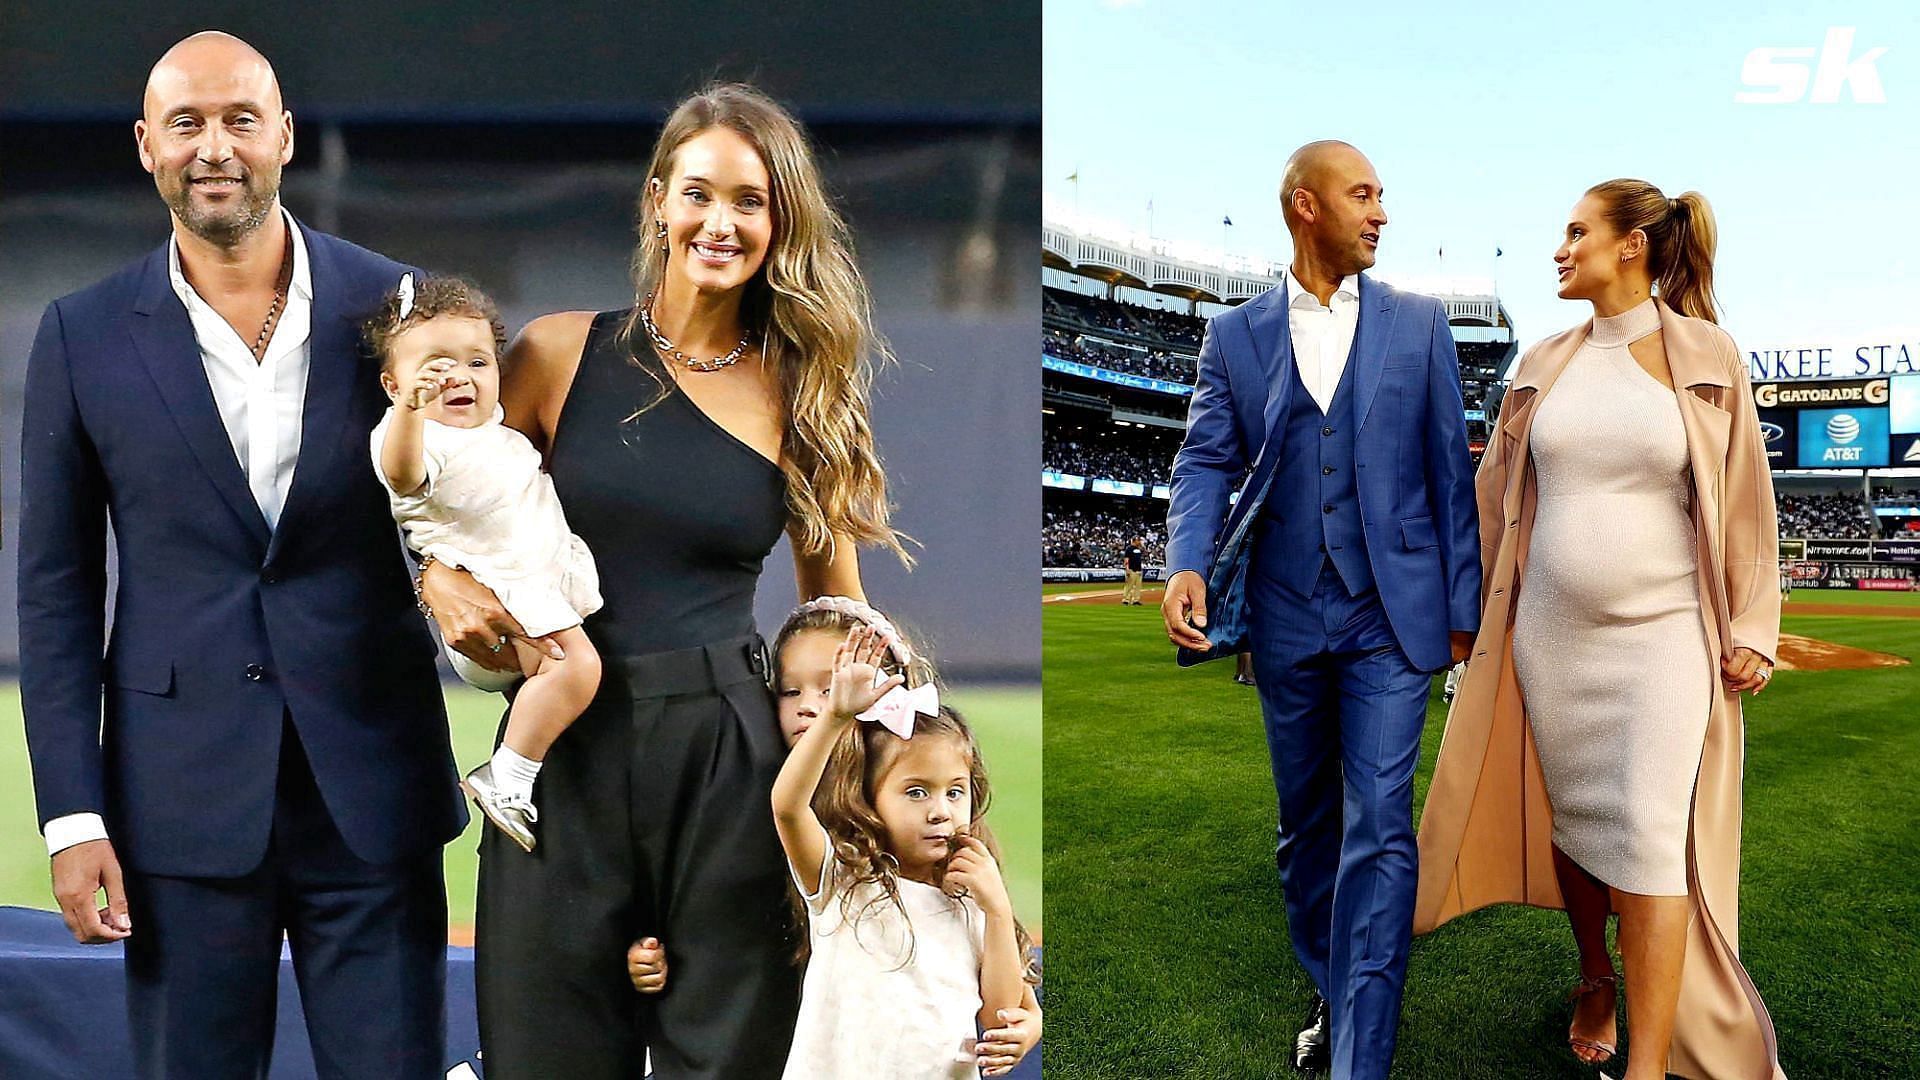 Derek Jeter poses with his Wife Hannah Davis during the retirement ceremony. of his number 2 jersey at Yankee Stadium on May 14, 2017 in New York City. (Photo by Al Bello/Getty Images); Derek Jeter with his wife and children at Yankee Stadium for his Hall of Fame Induction Ceremony.